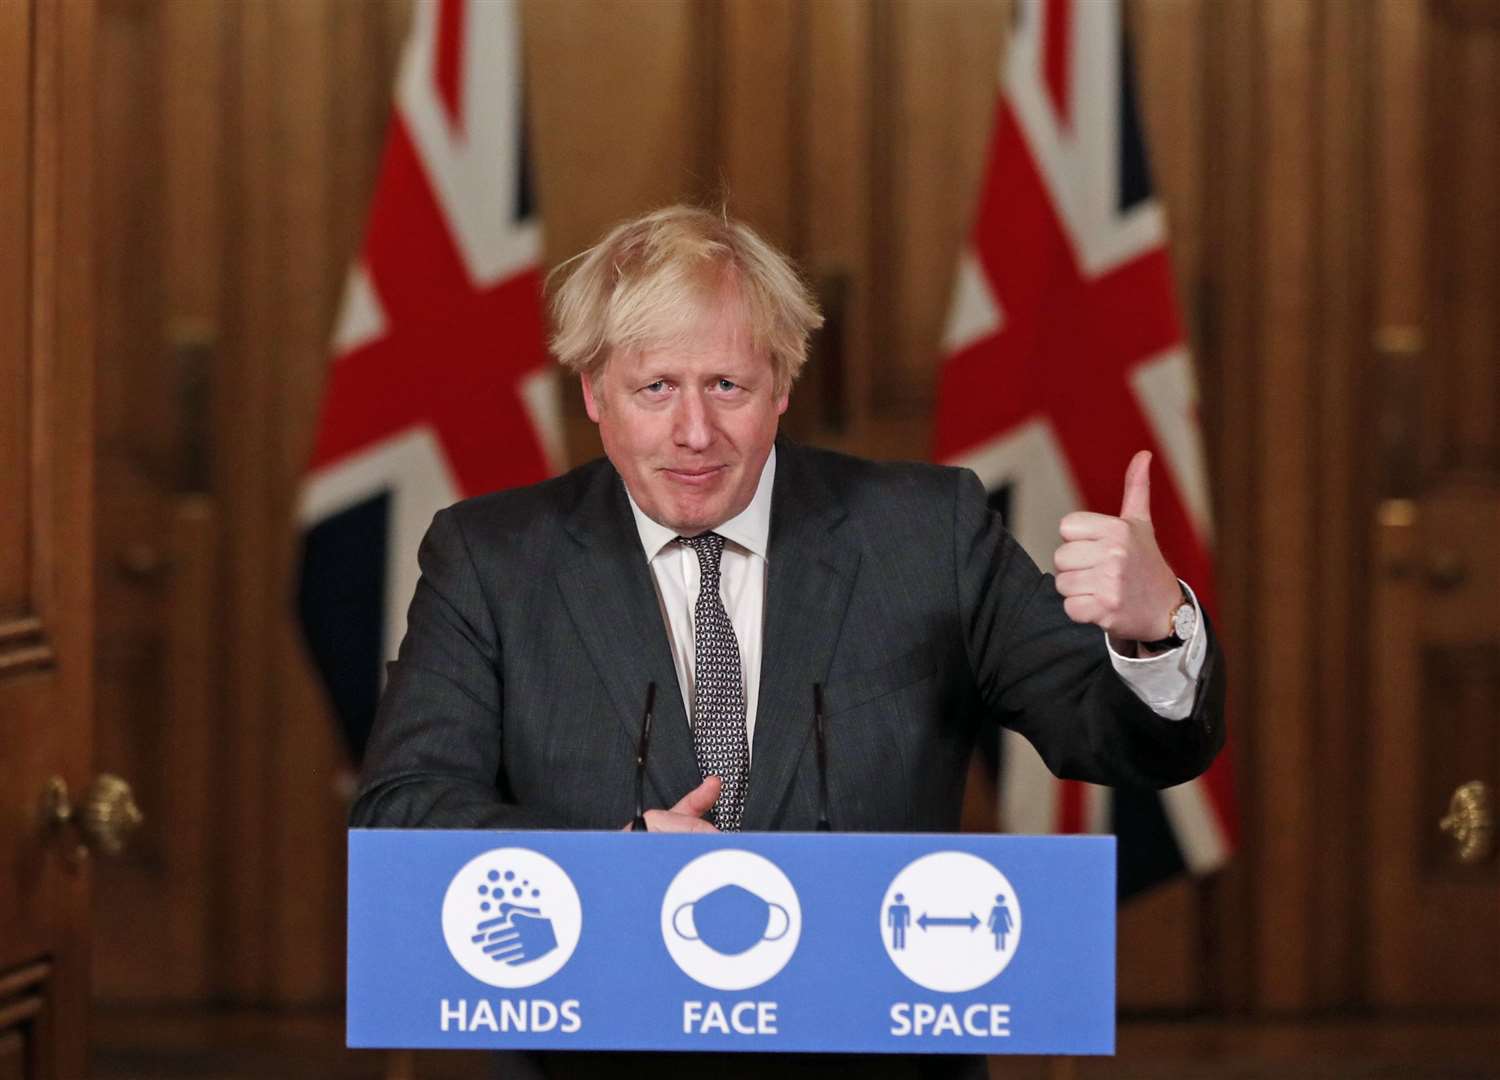 Boris Johnson was prime minister during the Covid pandemic (Heathcliff O’Malley/Daily Telegraph/PA)